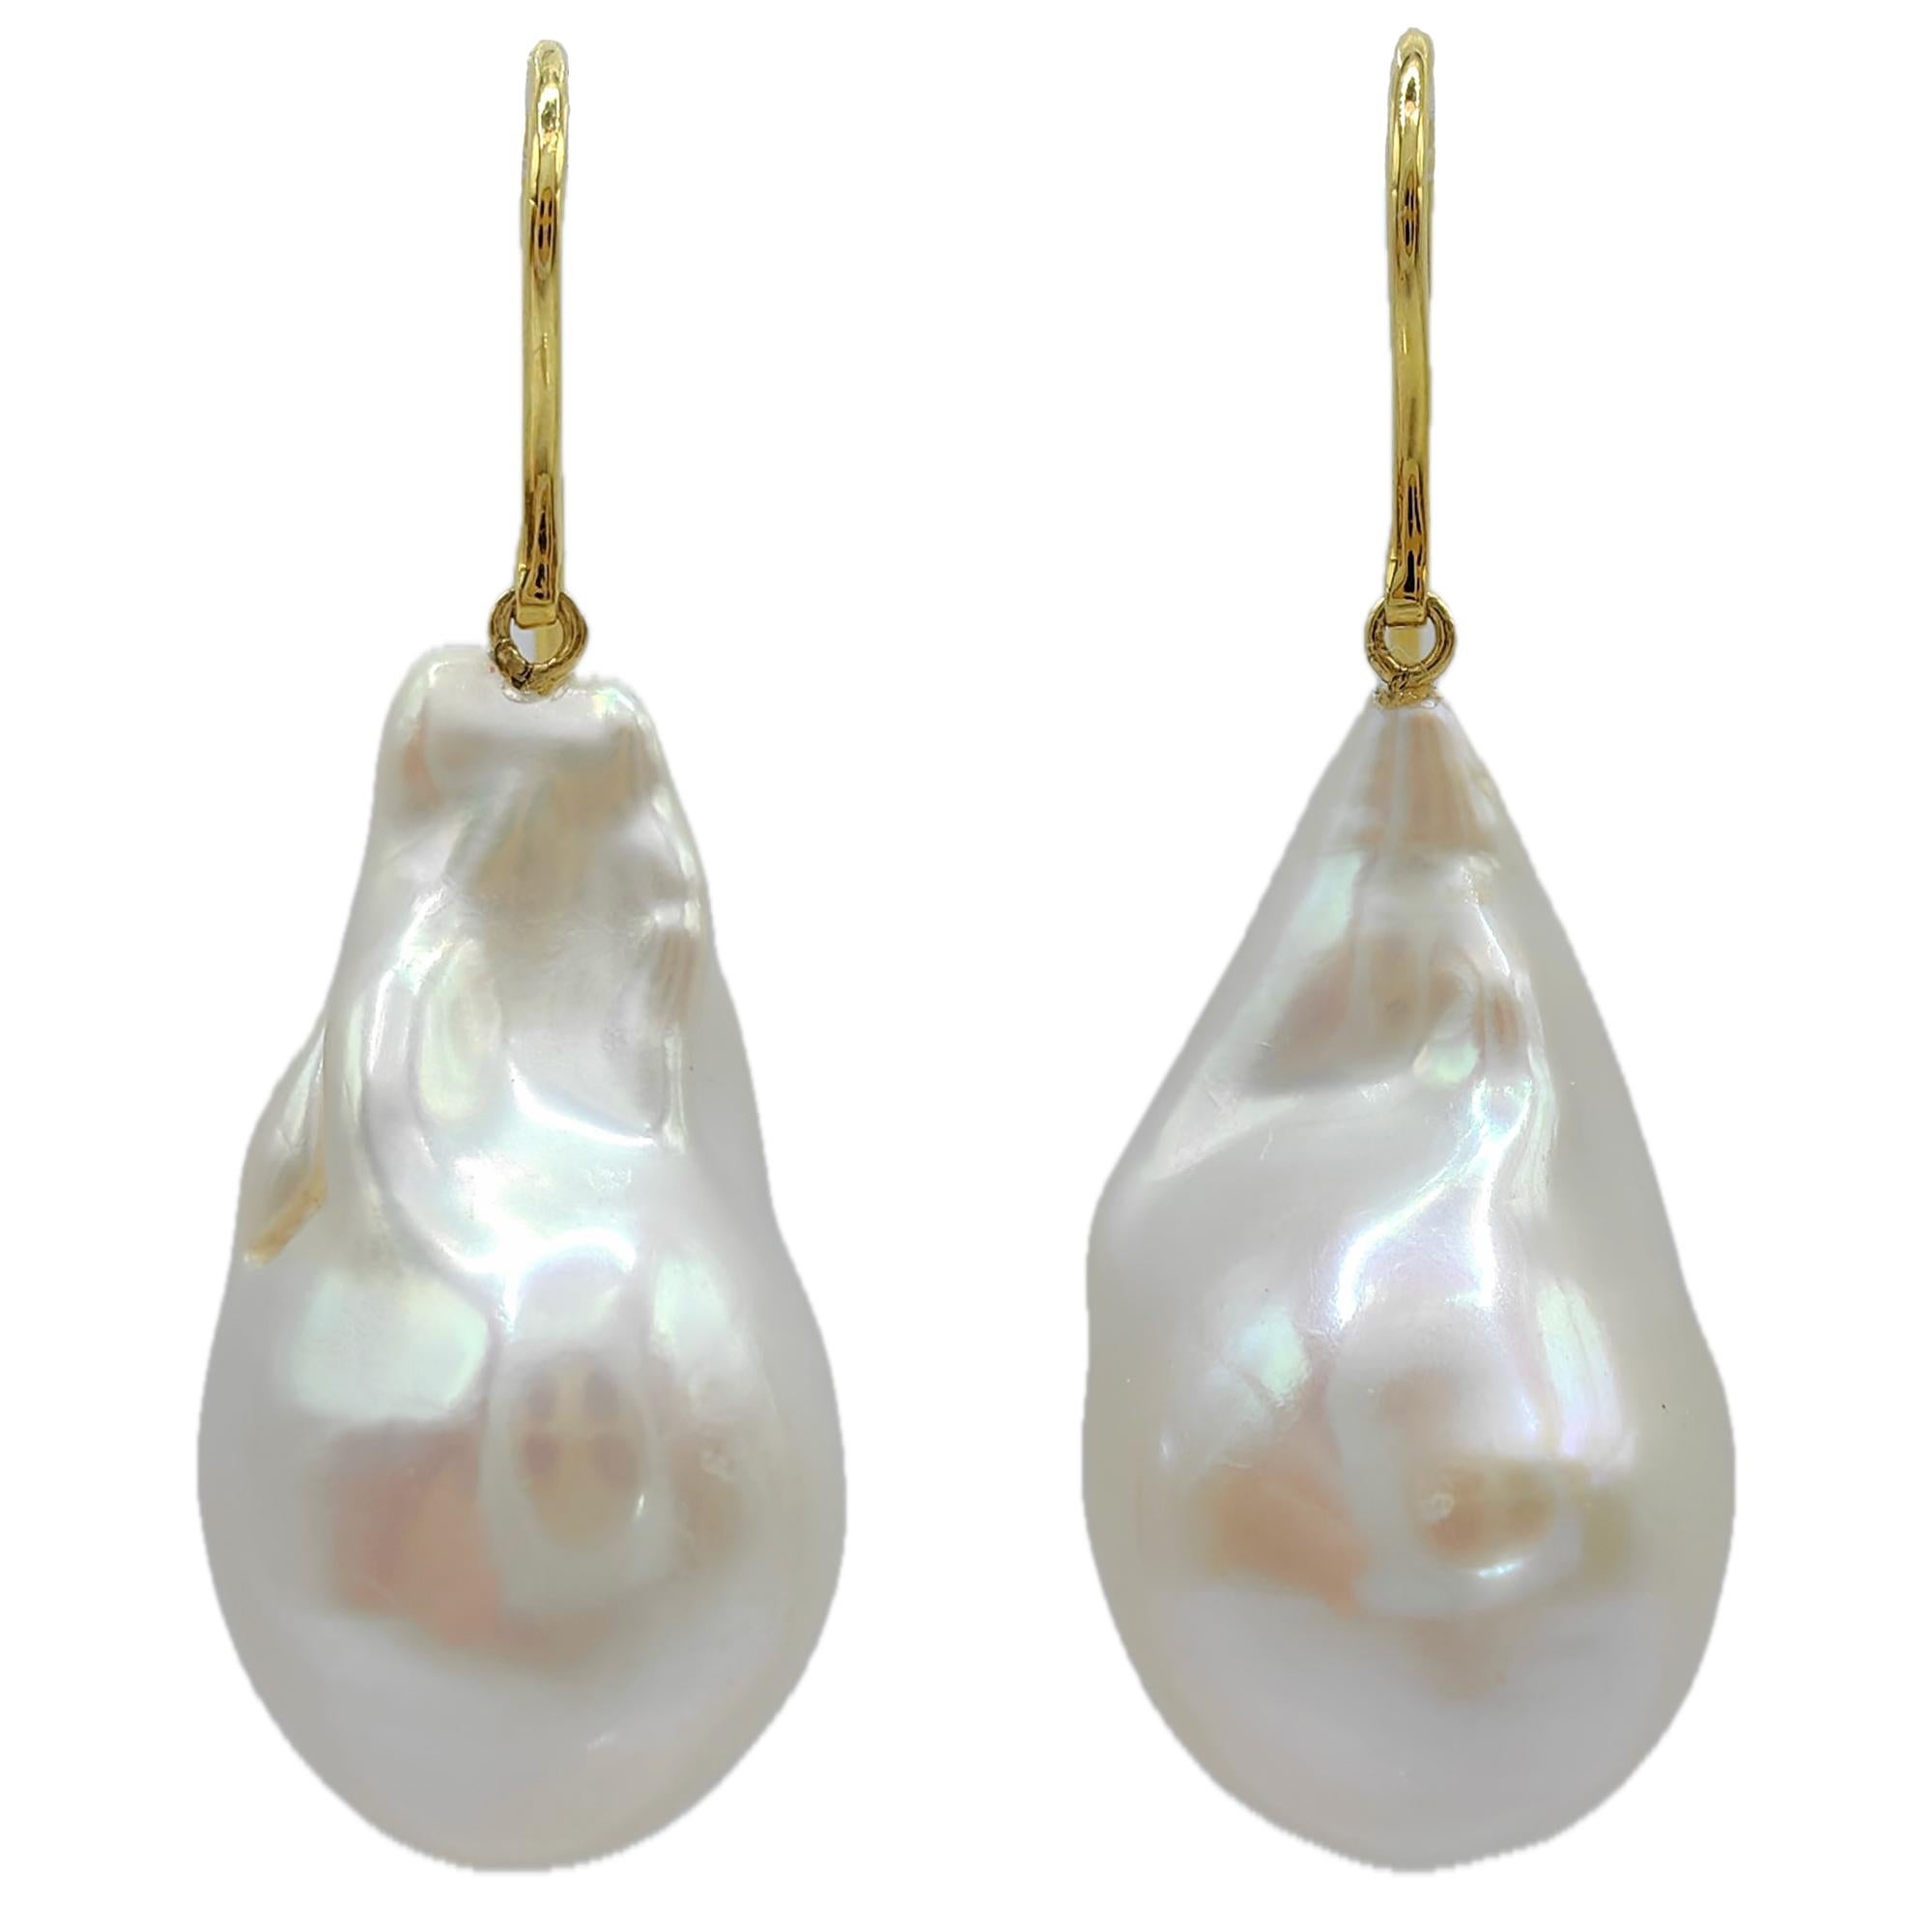 Iridescent Baroque Pearl Drop Earrings With 18K Yellow Gold French Hooks For Sale